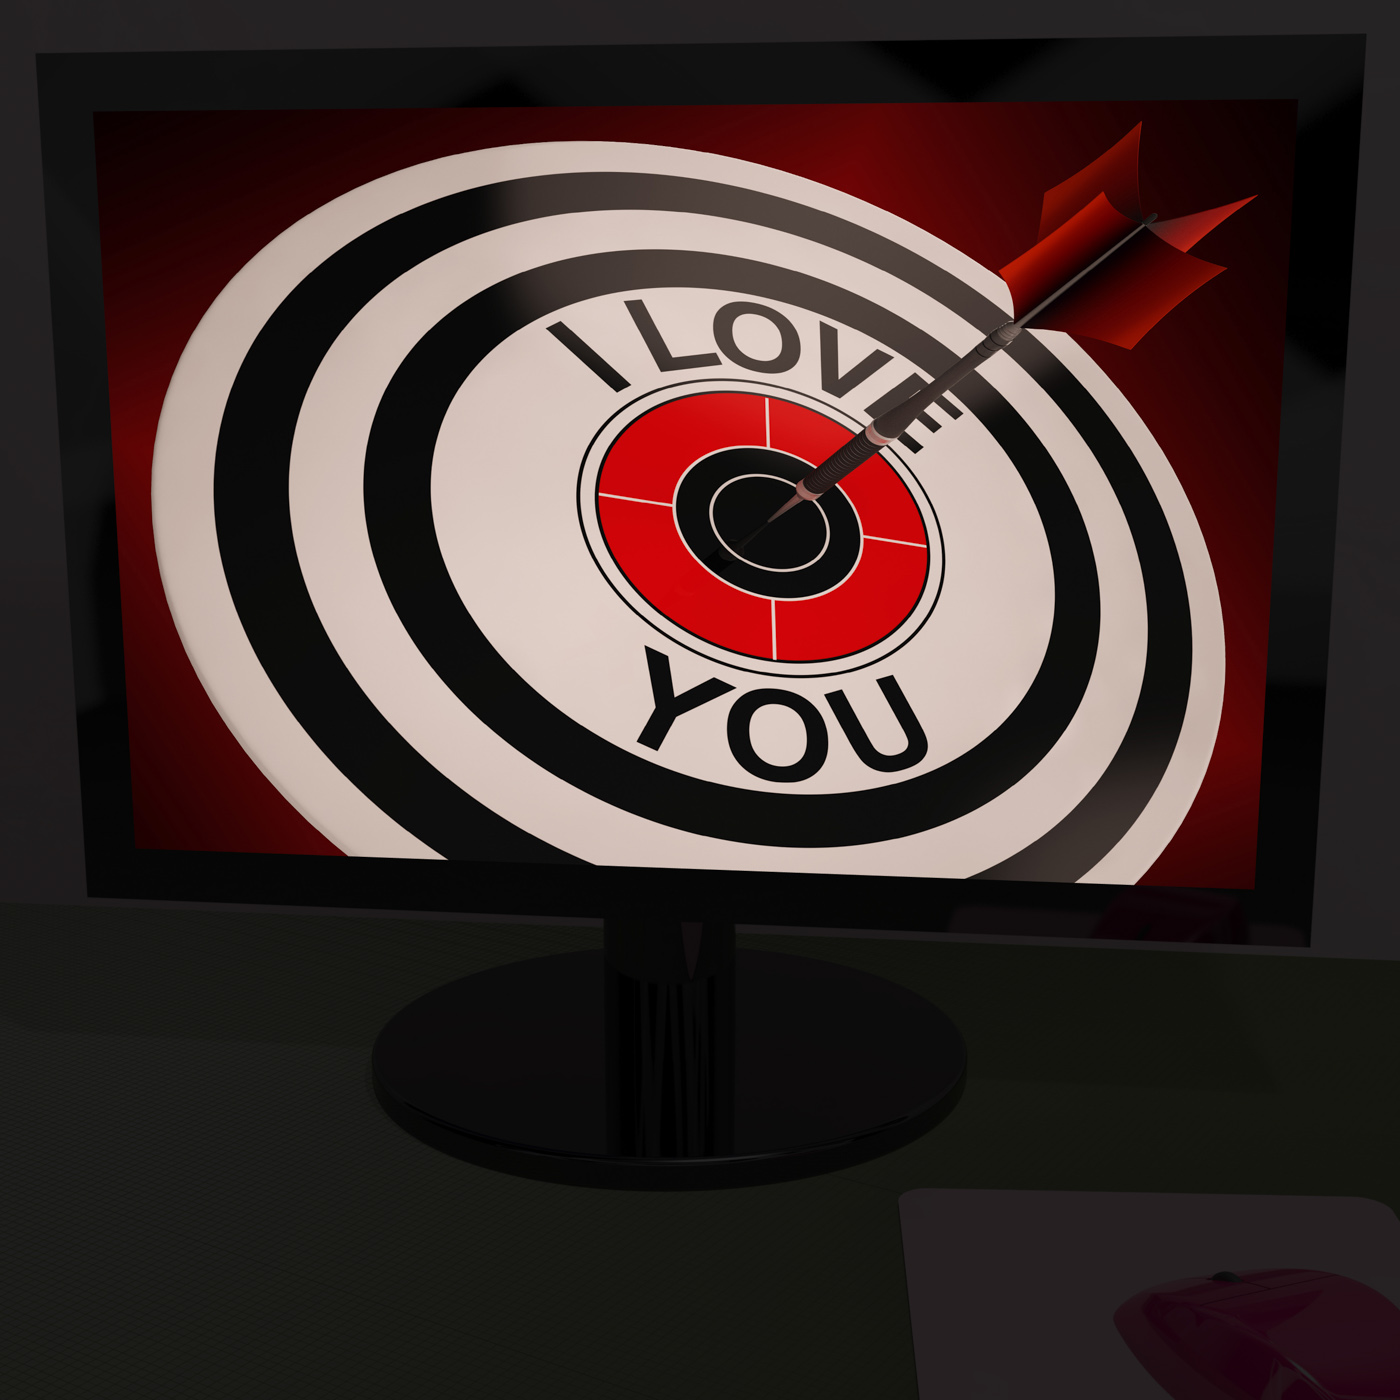 I love you on dartboard shows valentines day photo